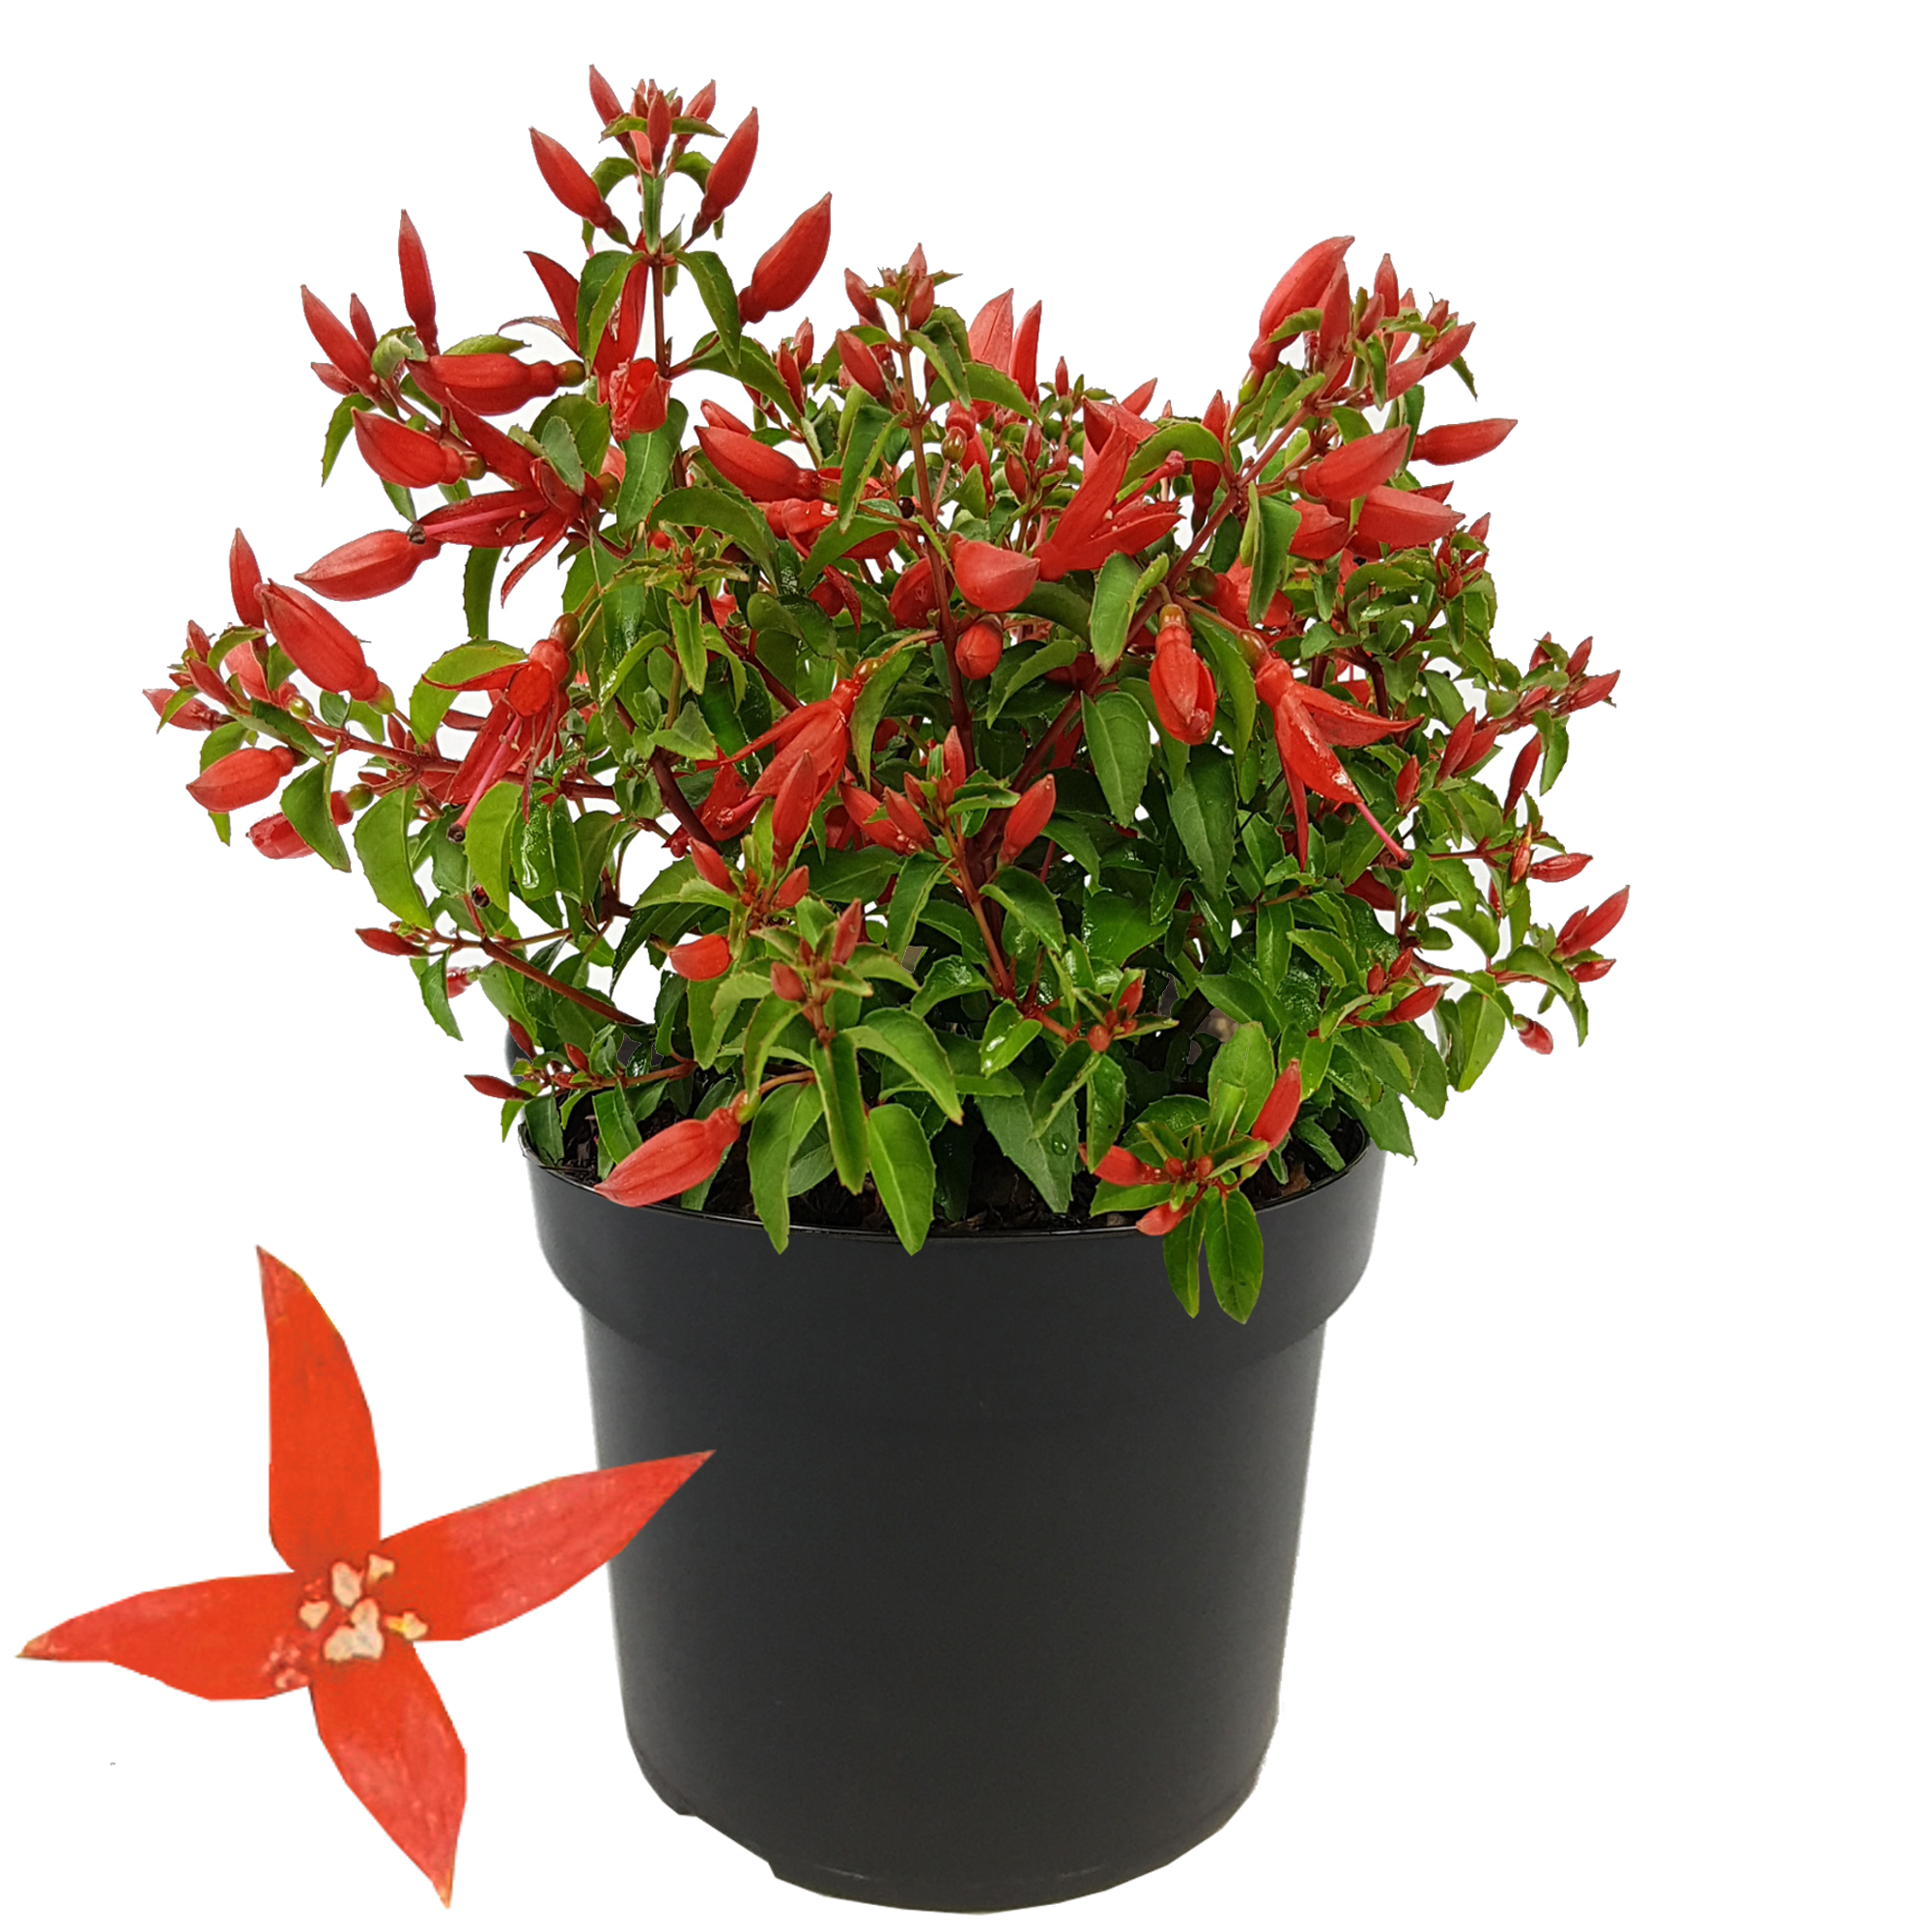 Fuchsie 'Chili Red®' 17 cm Topf + product picture